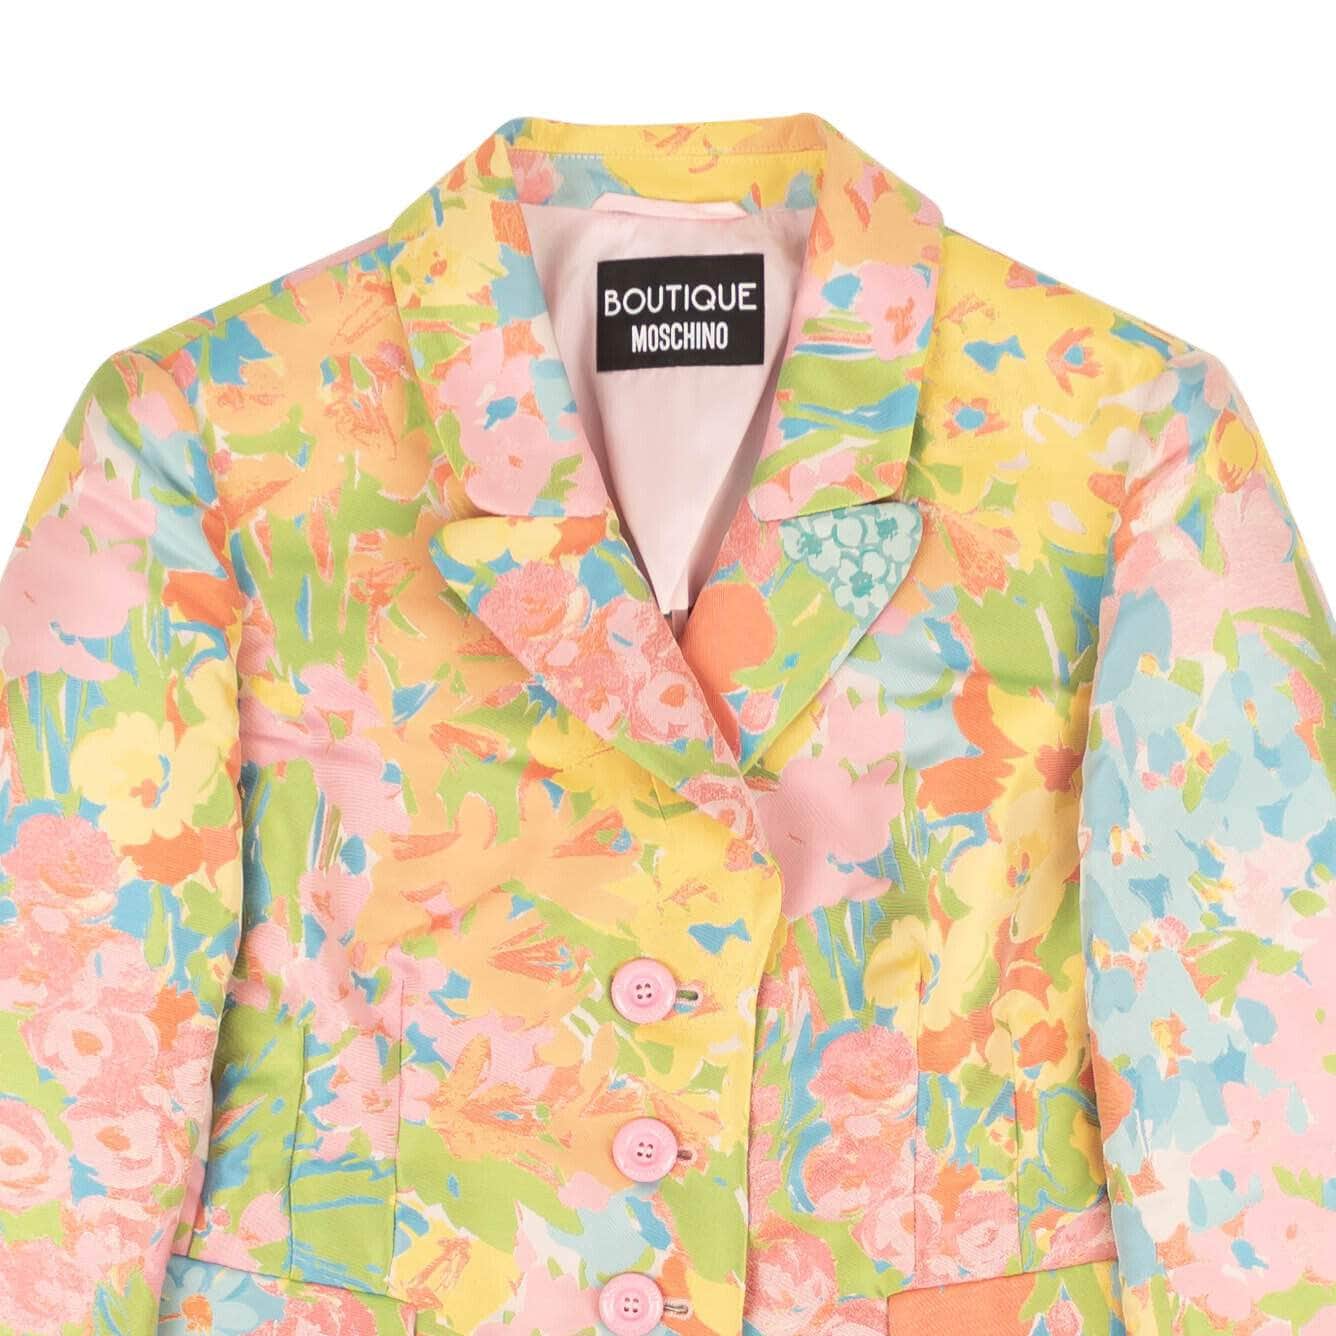 BOUTIQUE MOSCHINO 250-500, boutique-moschino, channelenable-all, chicmi, couponcollection, gender-womens, main-clothing, size-42, size-44, size-46, womens-jackets-blazers Multi Spring Floral Evening Short Jacket